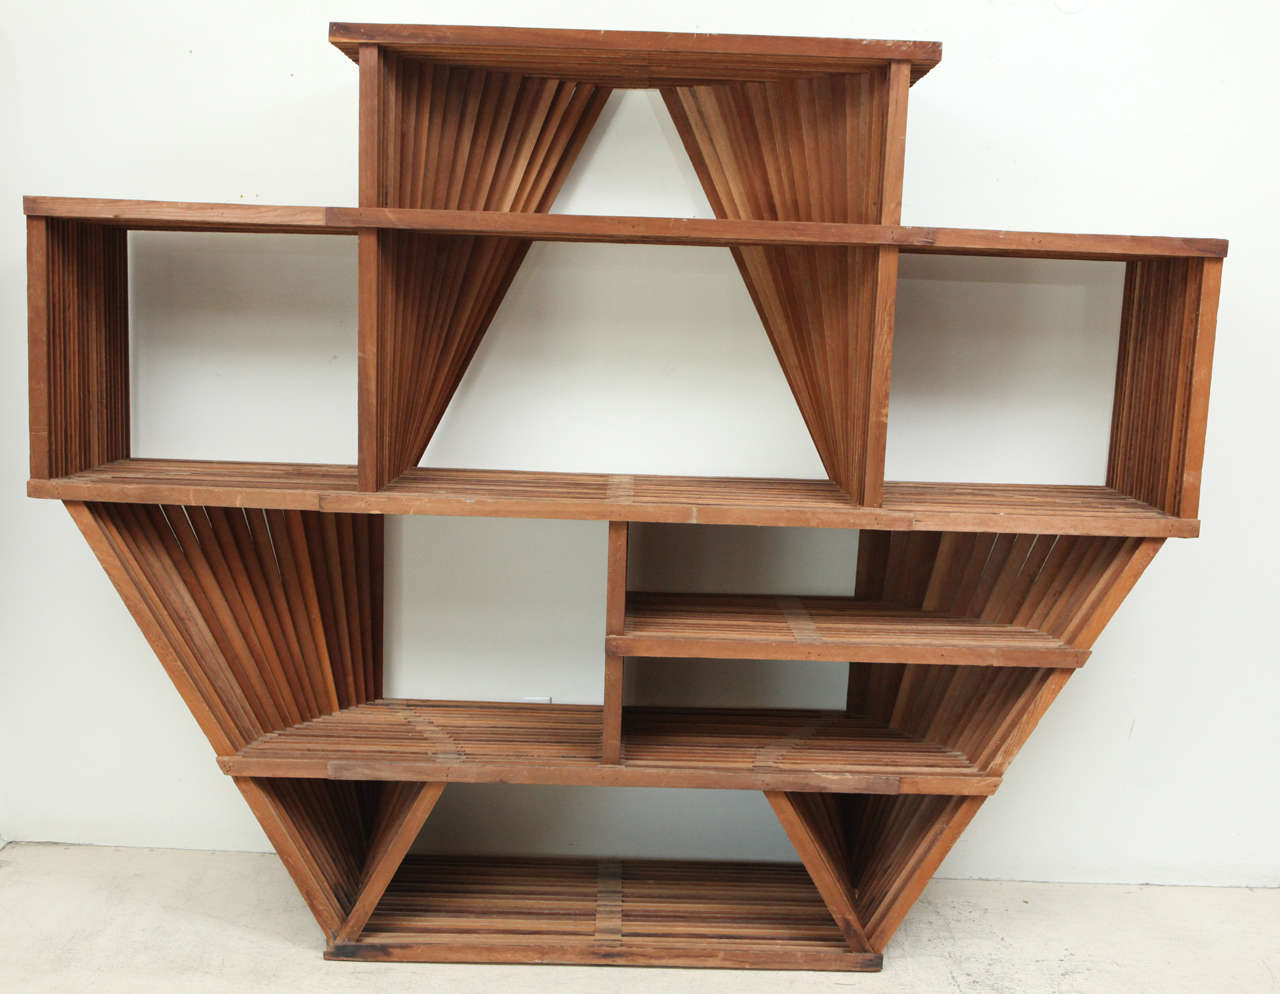 Large Custom Shelving Unit from a Cliff May House in Long Beach, CA.